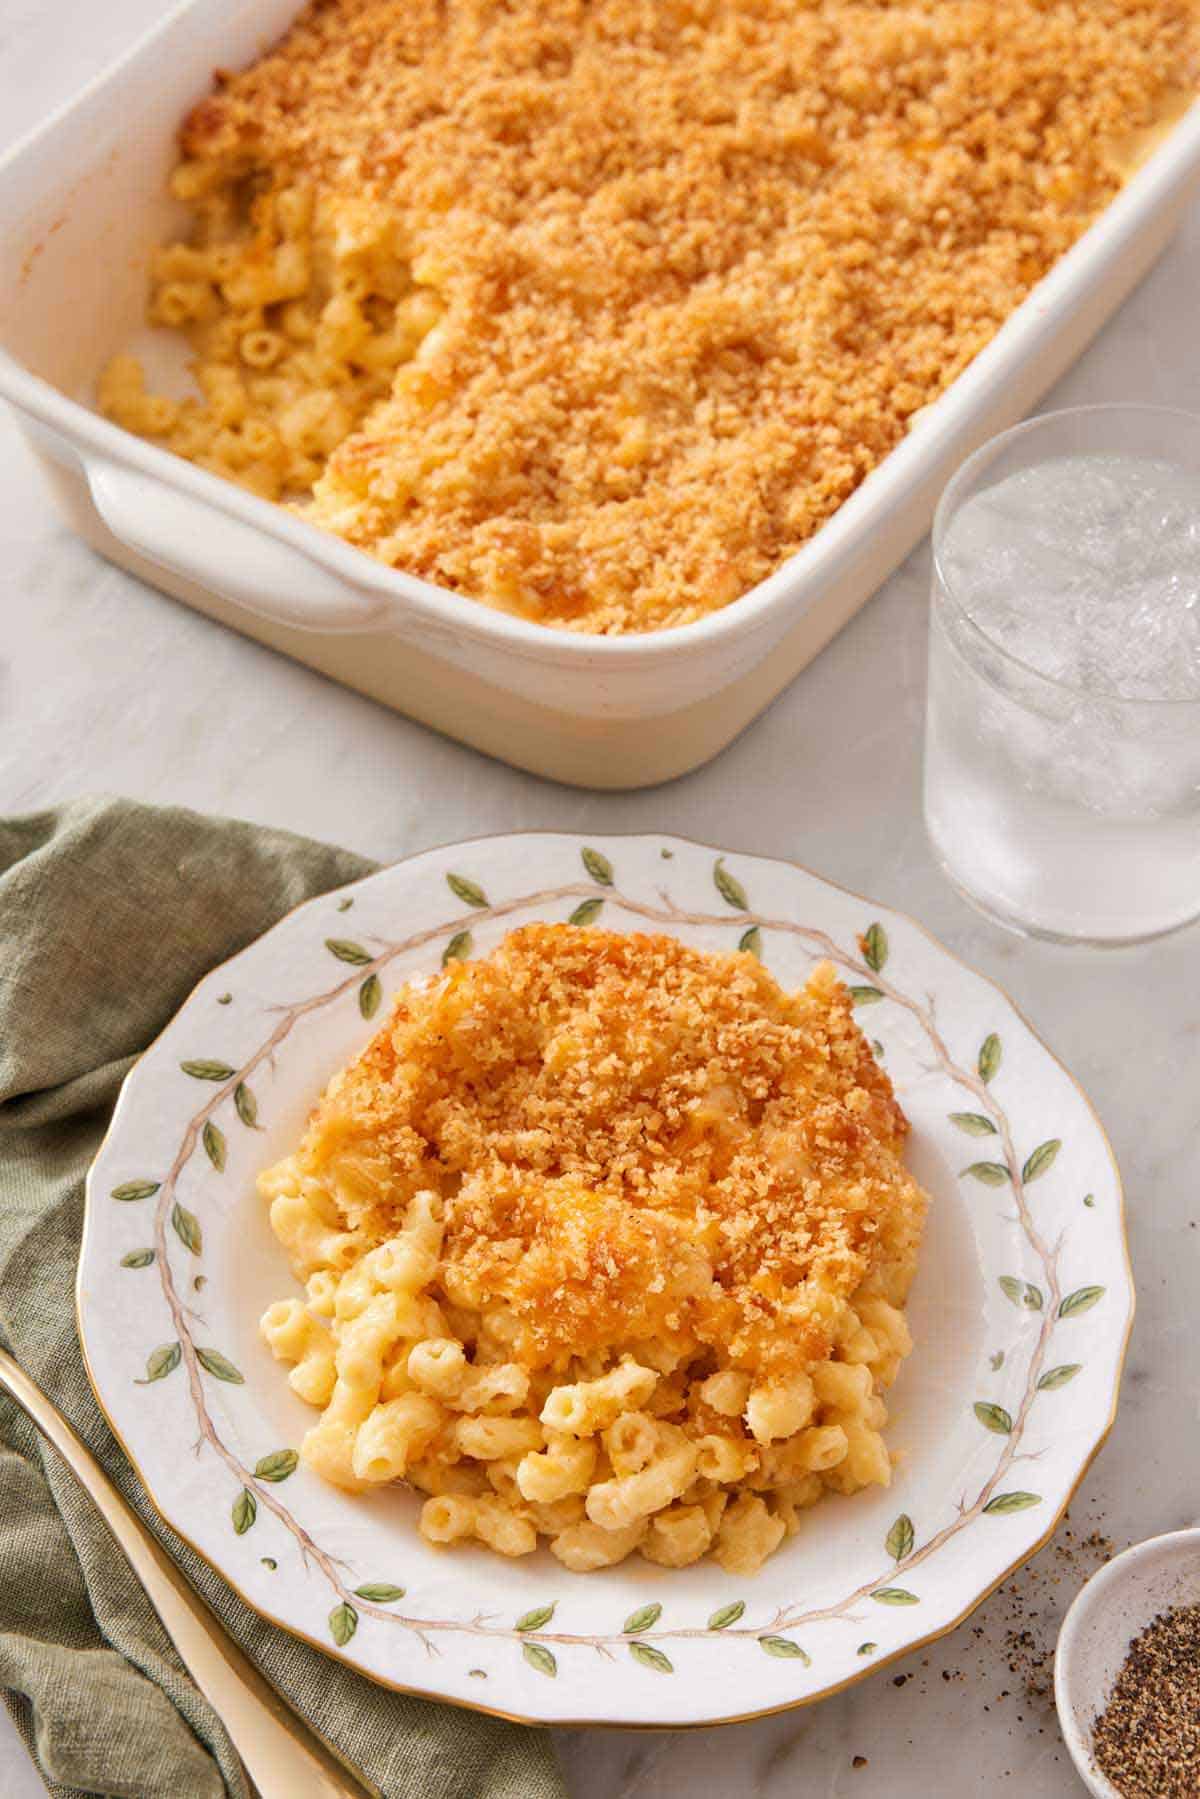 A plate of baked mac and cheese with a glass of water and baking dish with the rest in the background.